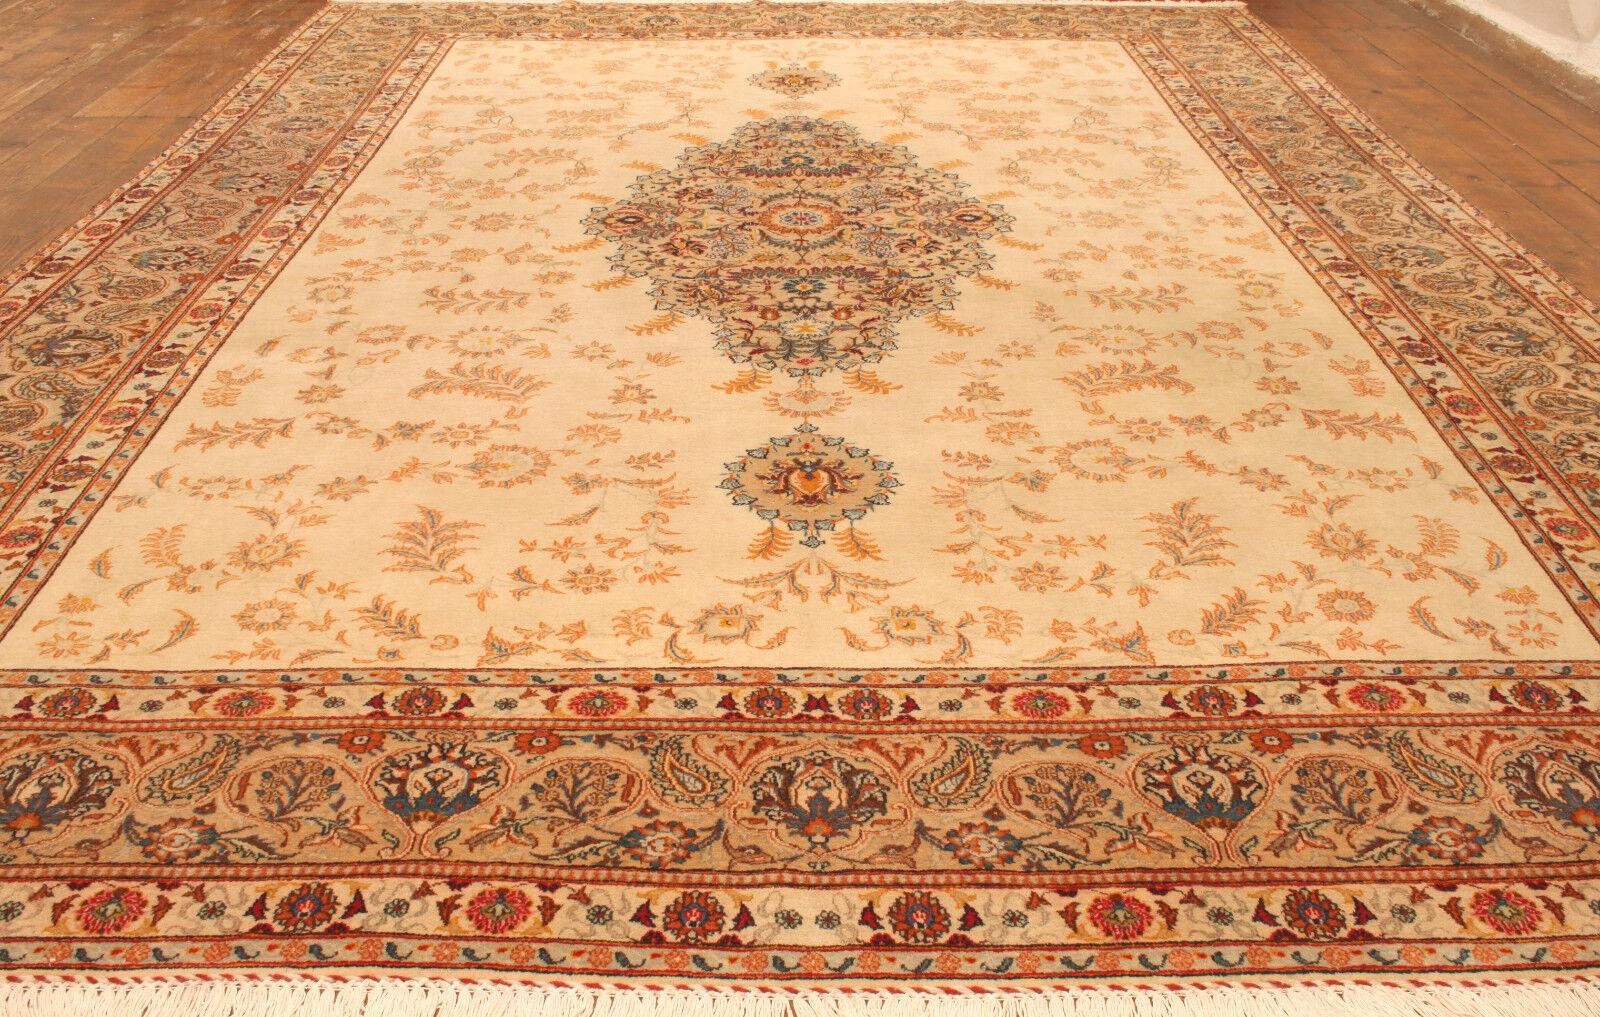 Elevate your living space with the refined simplicity of our Handmade Contemporary Persian Style Tabriz Rug, a stunning creation from the 2000s. Measuring at 8.9' x 12.8' (273cm x 393cm), this rug features a beautiful beige color, showcasing one